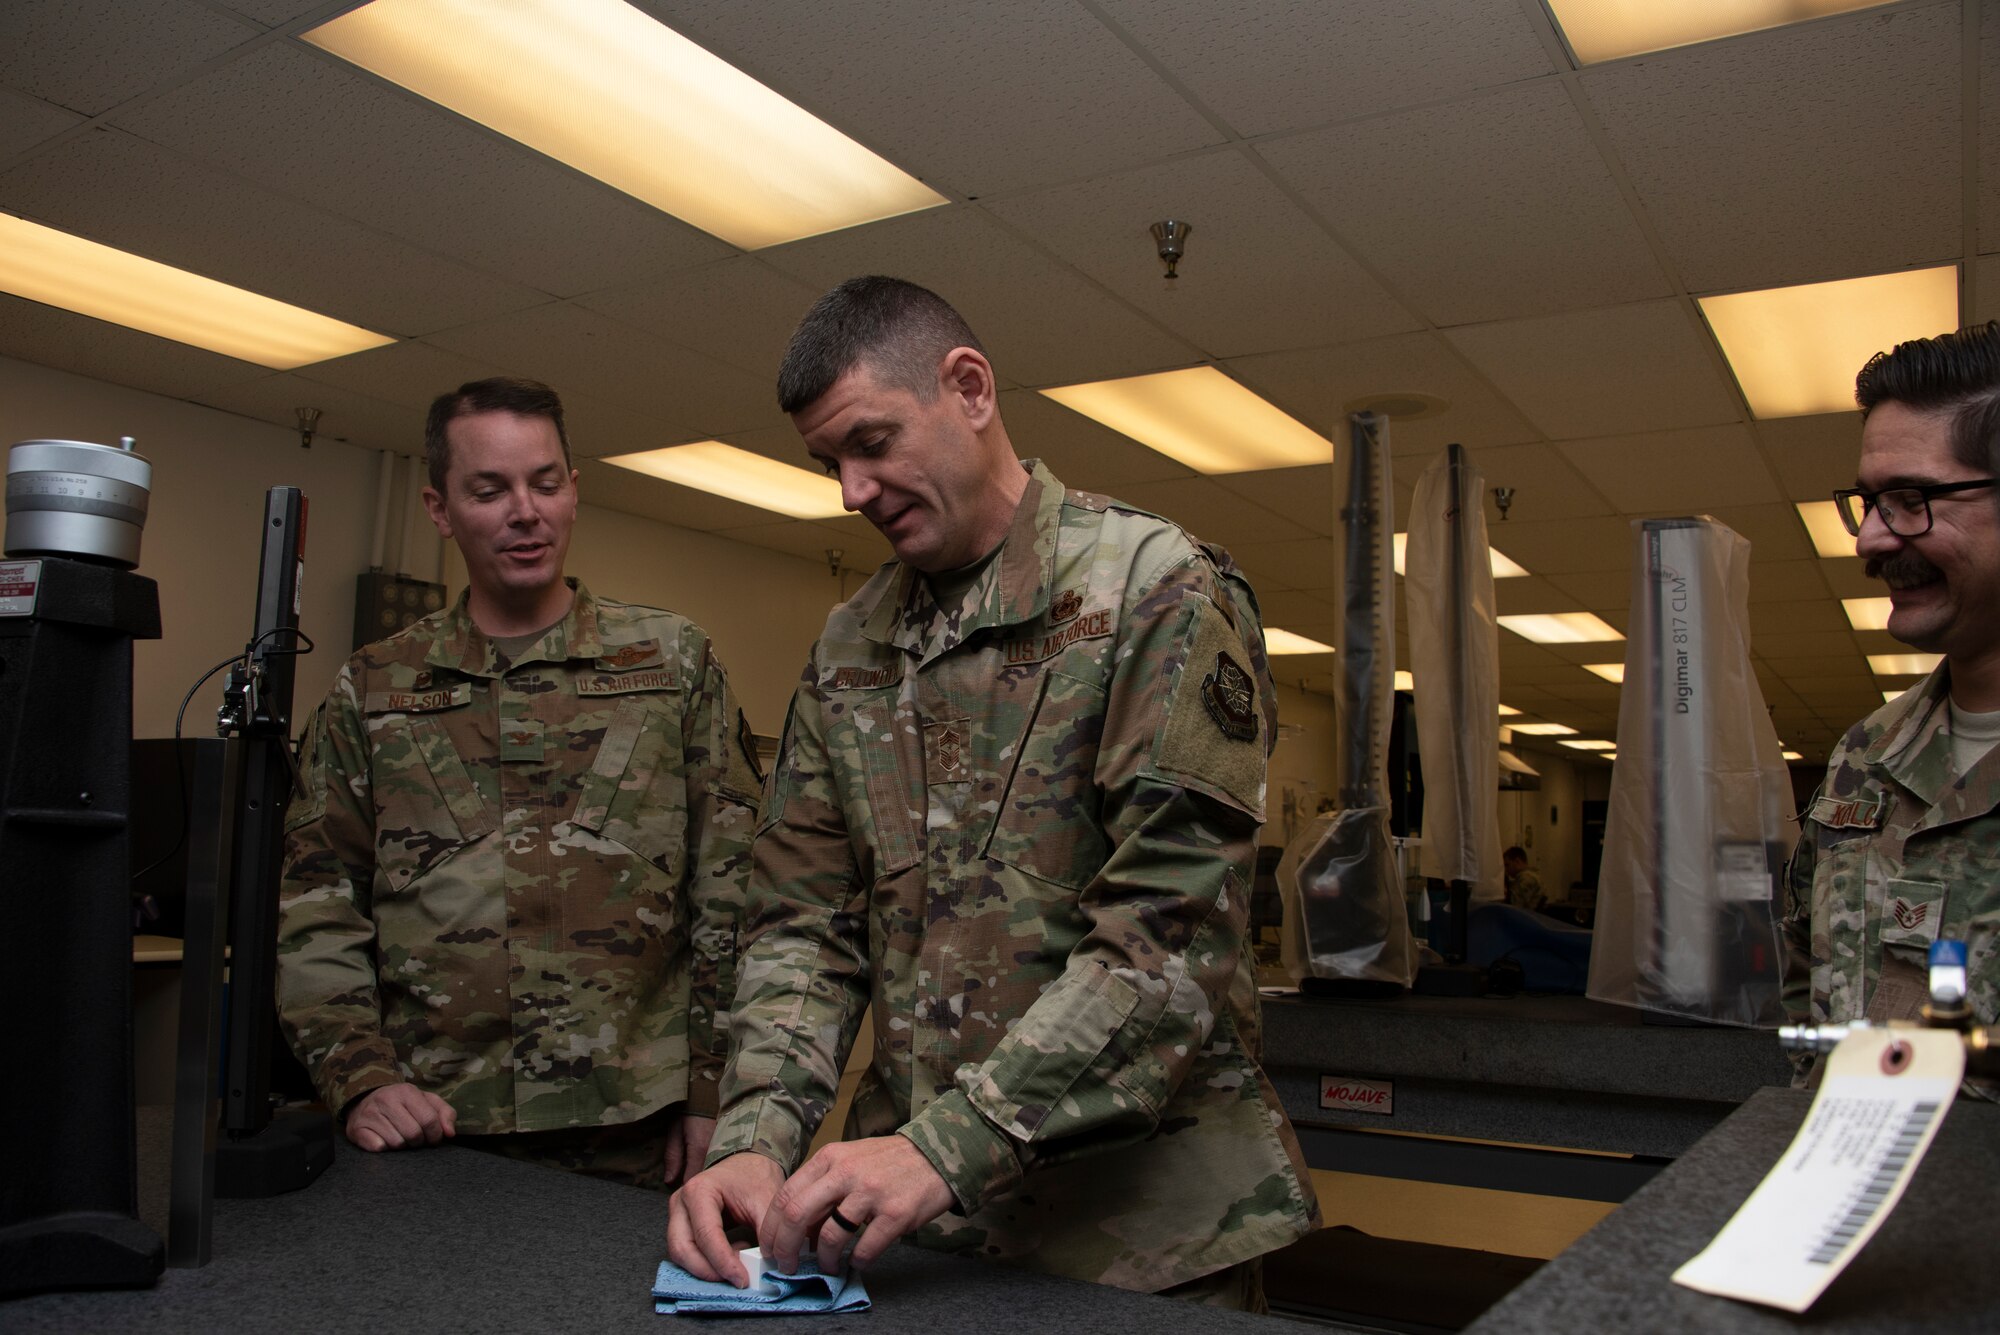 U.S. Air Force Chief Master Sgt. Derek Crowder, center, 60th Air Mobility Wing command chief, works with gauge blocks during a Leadership Rounds visit inside the 60th Maintenance Squadron Precision Measurement Equipment Laboratory while Col. Jeff Nelson, left, 60th AMW commander and Staff Sgt. Vincenzo Kupilow, right, 60th MXS physical dimensional craftsman, look on Nov. 1, 2019 at Travis Air Force Base, California. The PMEL team is responsible for ensuring the accuracy of test equipment for 255 work centers. The Leadership Rounds program provides 60th AMW leadership an opportunity to interact with Airmen to get a detailed view of each mission performed at Travis AFB. (U.S. Air Force photo by Tech. Sgt. James Hodgman)